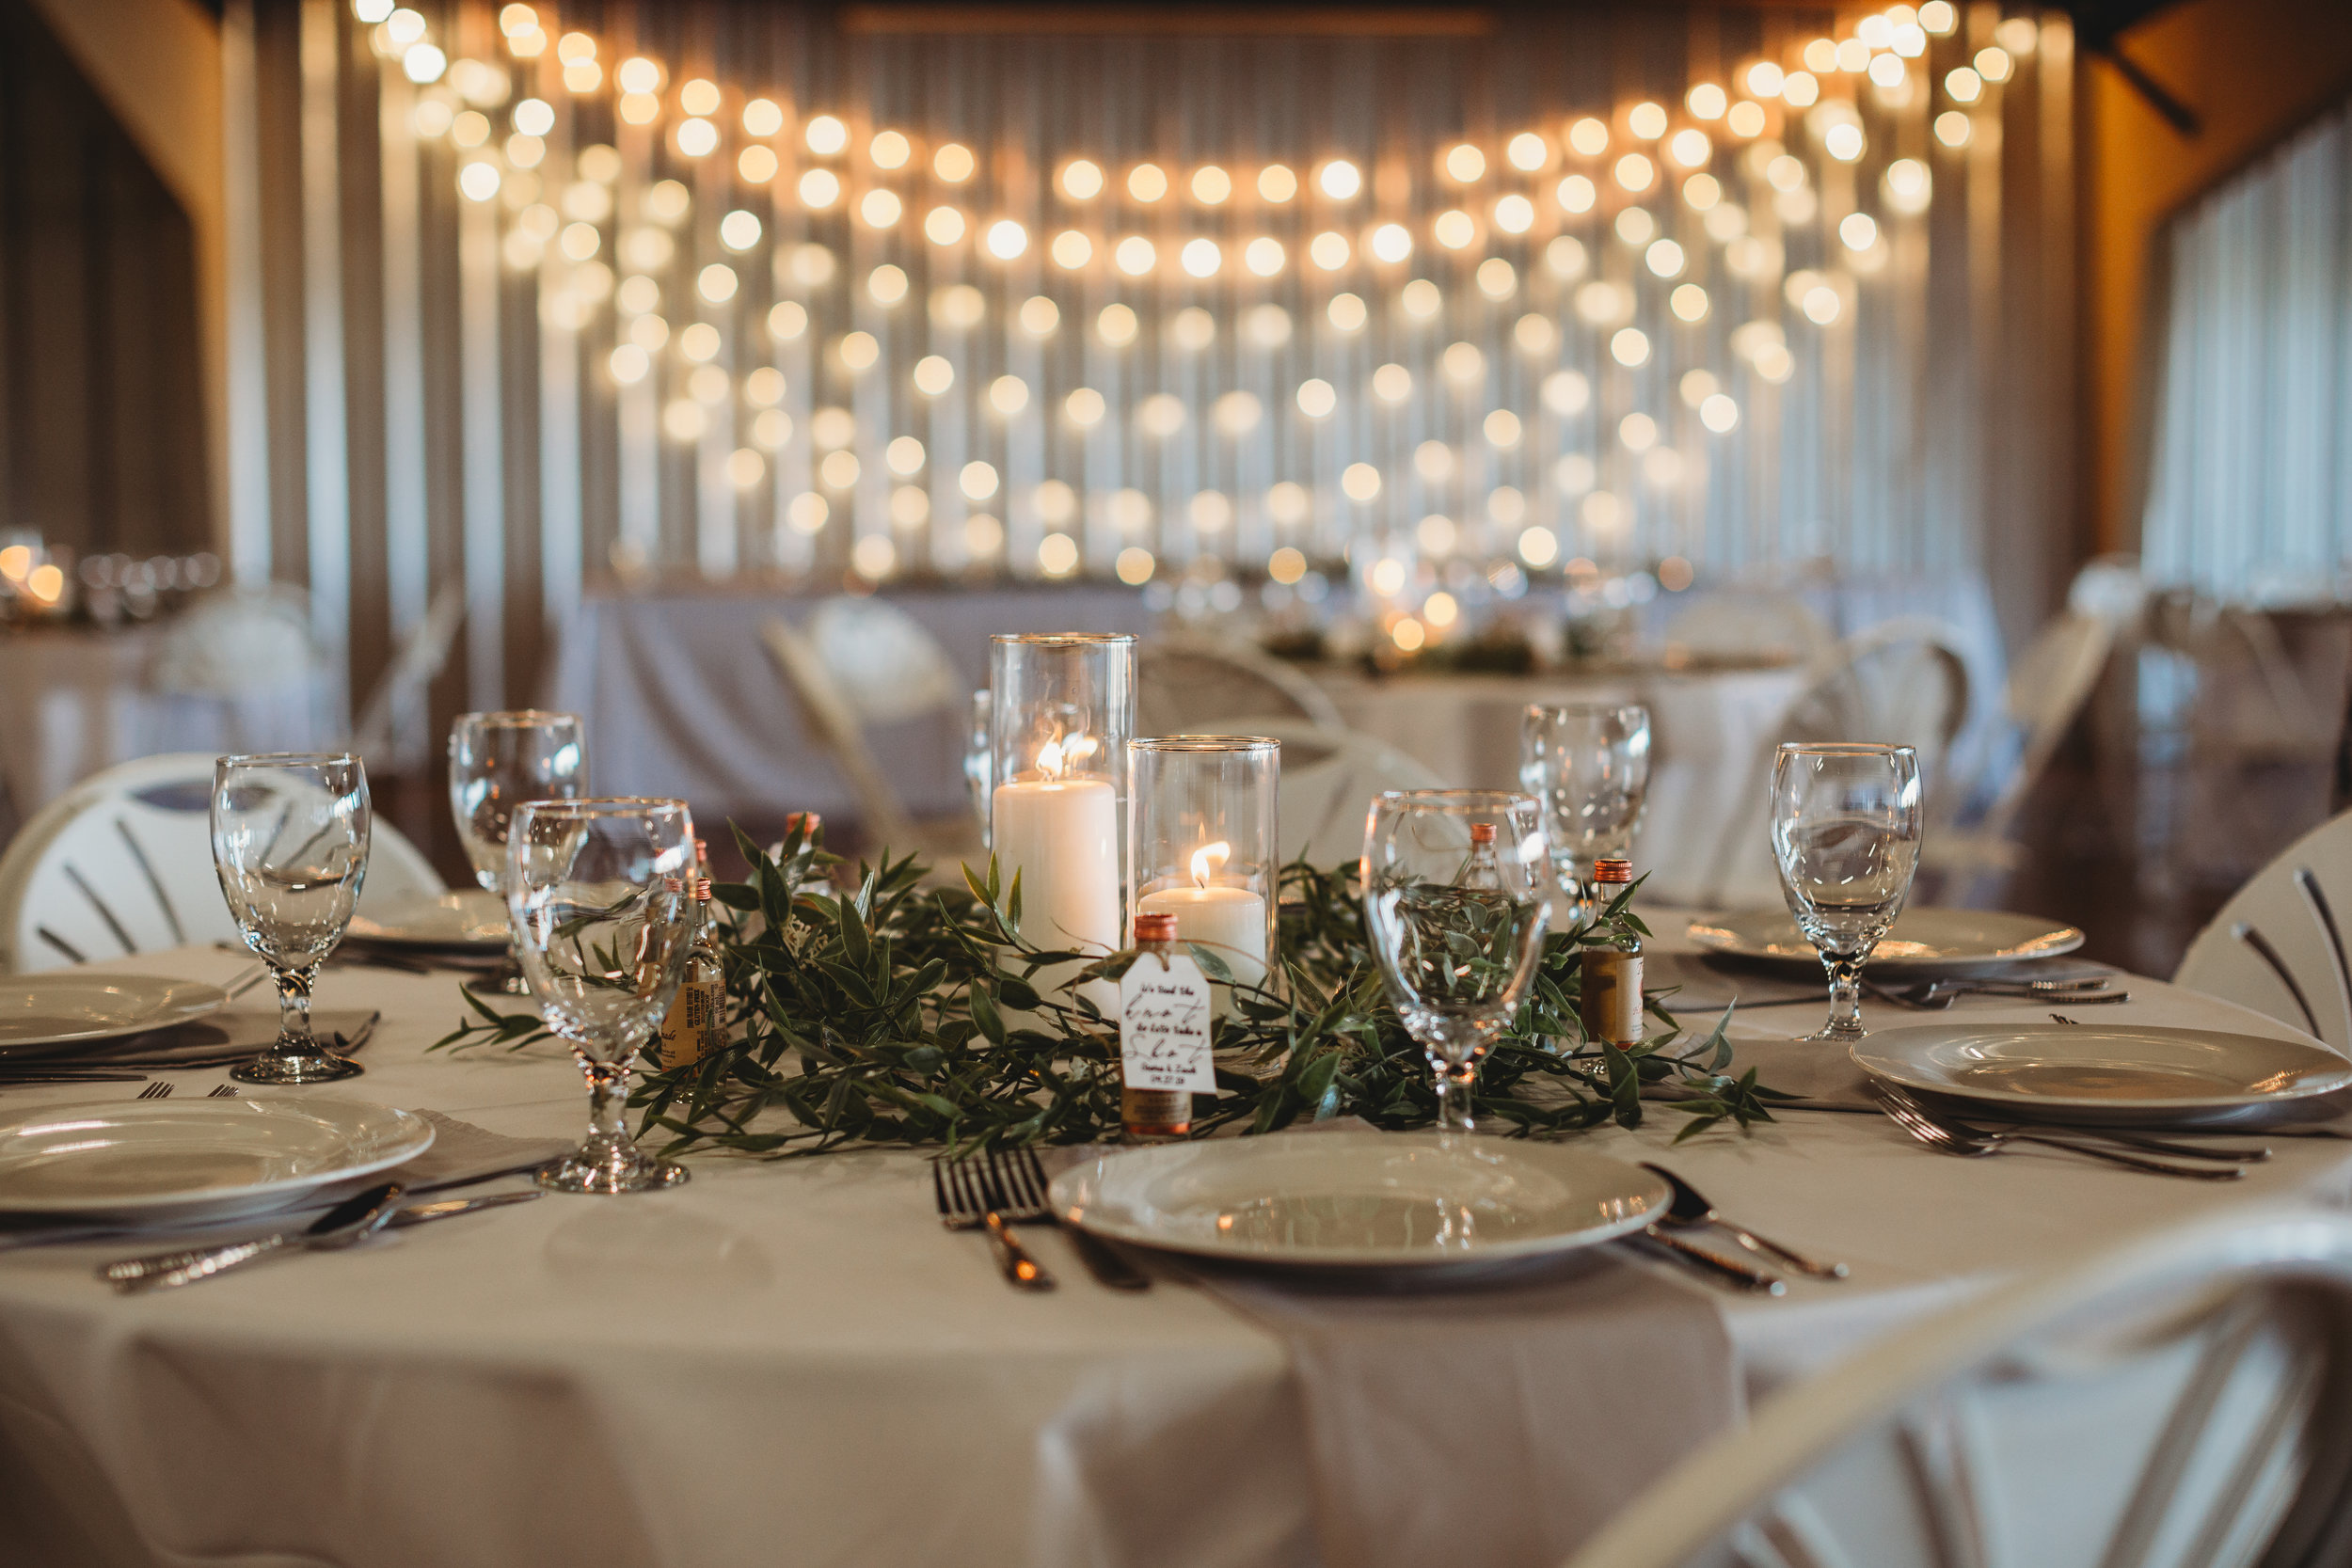  Gorgeous accent lighting and table setting during the wedding reception #tealawardphotography #texasweddings #amarillophotographer #amarilloweddingphotographer #emotionalphotography #intimateweddingphotography #weddingday #weddingphotos #texasphotographer #inspiredwedding #intimatewedding #weddingformals #bigday #portraits 